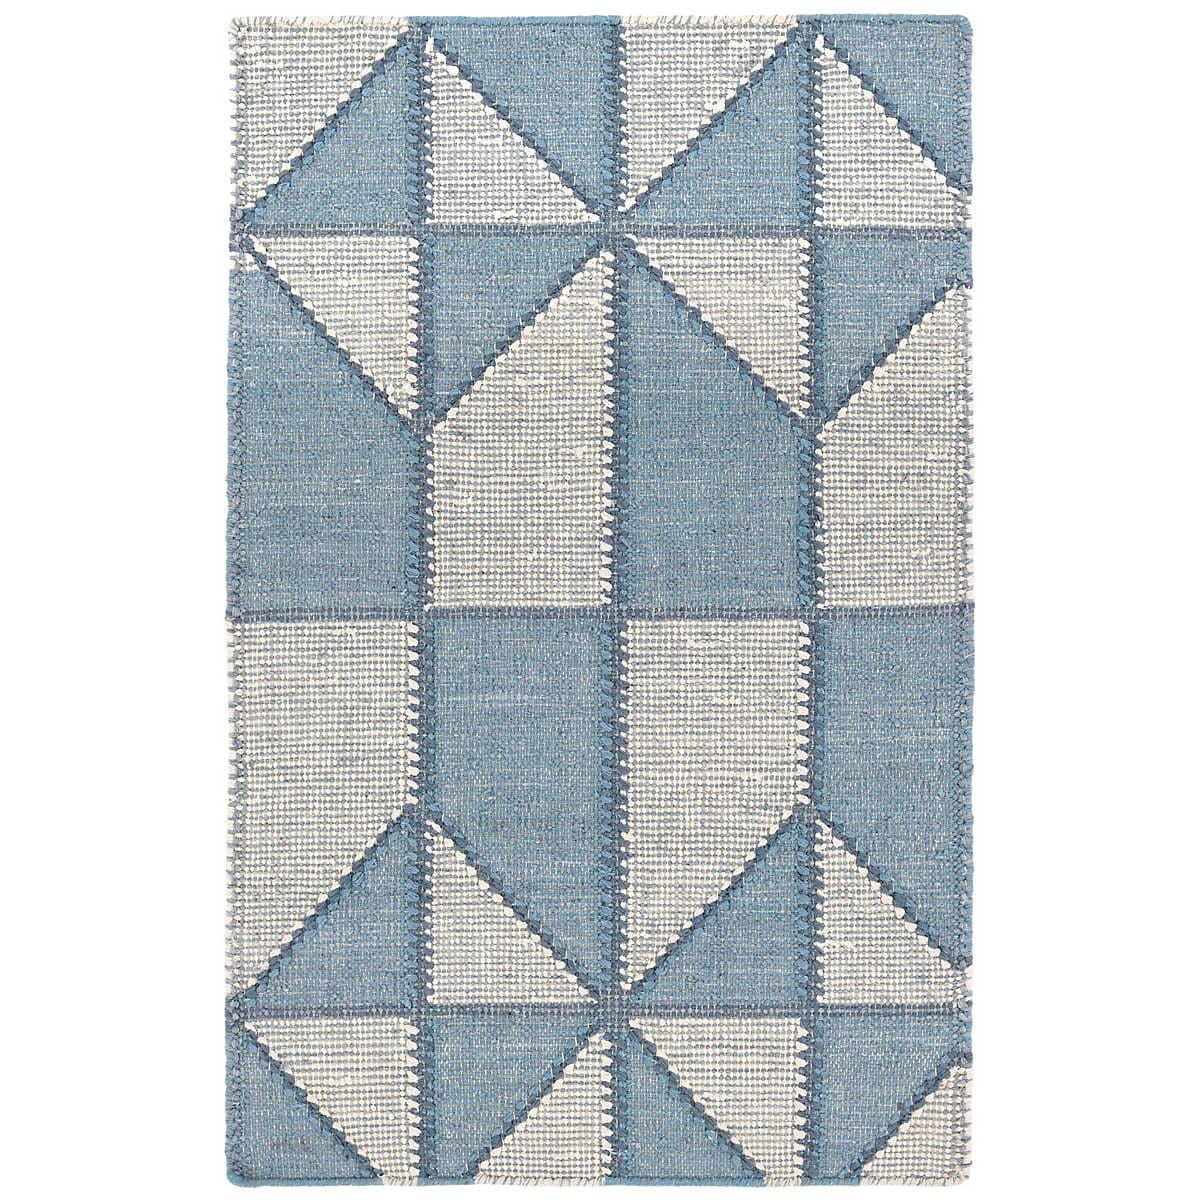 Ojai Blue Loom Knotted Cotton Rug Rugs 